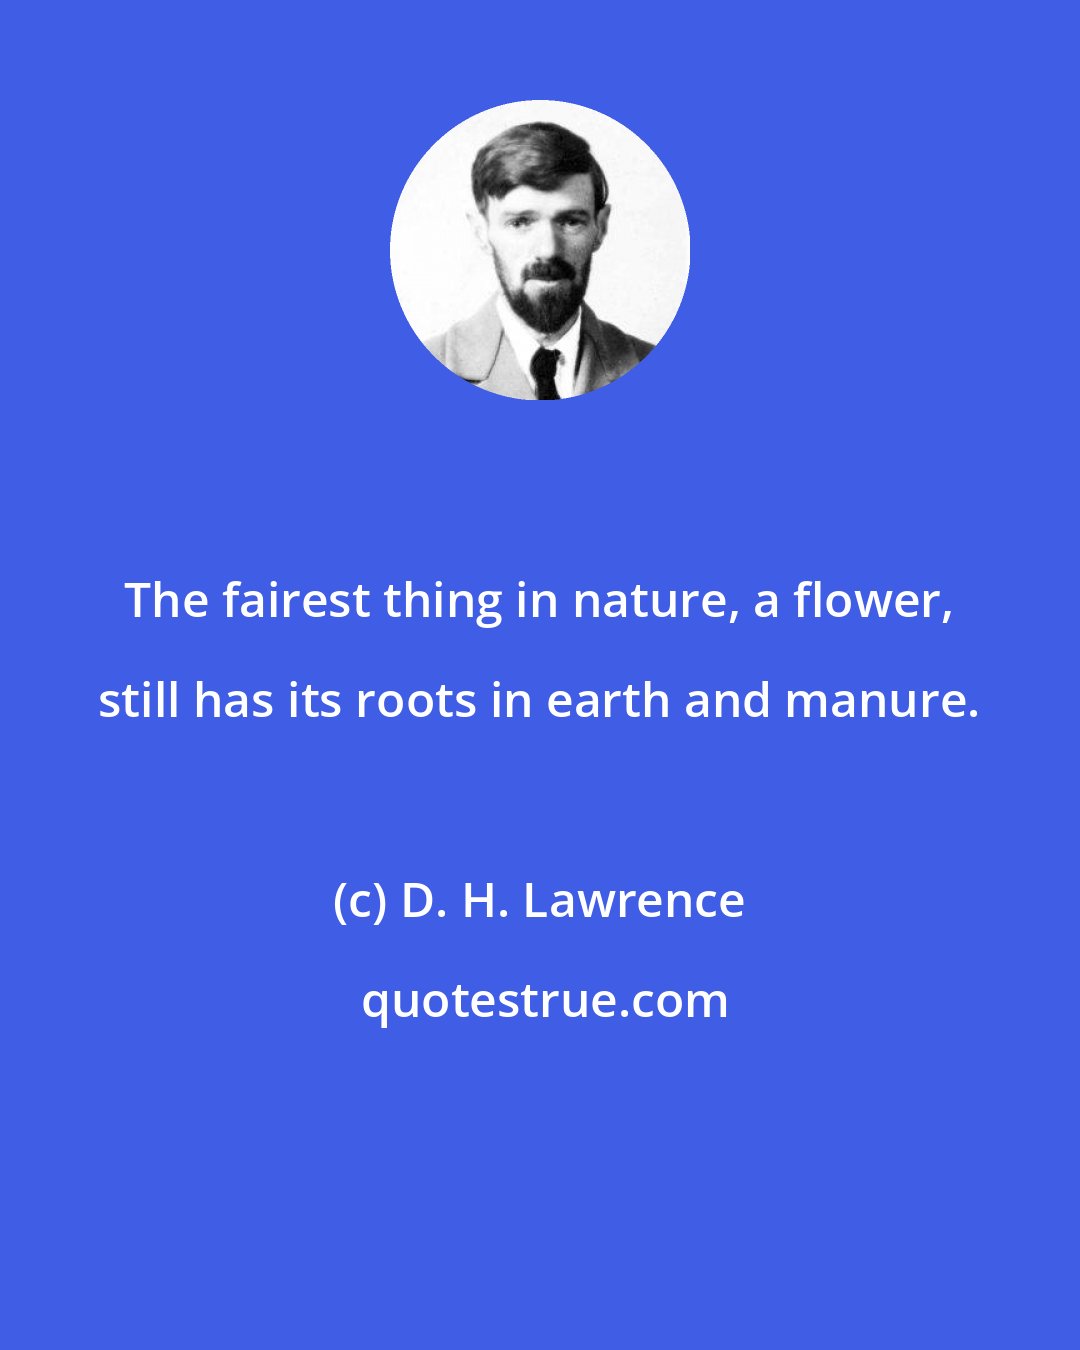 D. H. Lawrence: The fairest thing in nature, a flower, still has its roots in earth and manure.